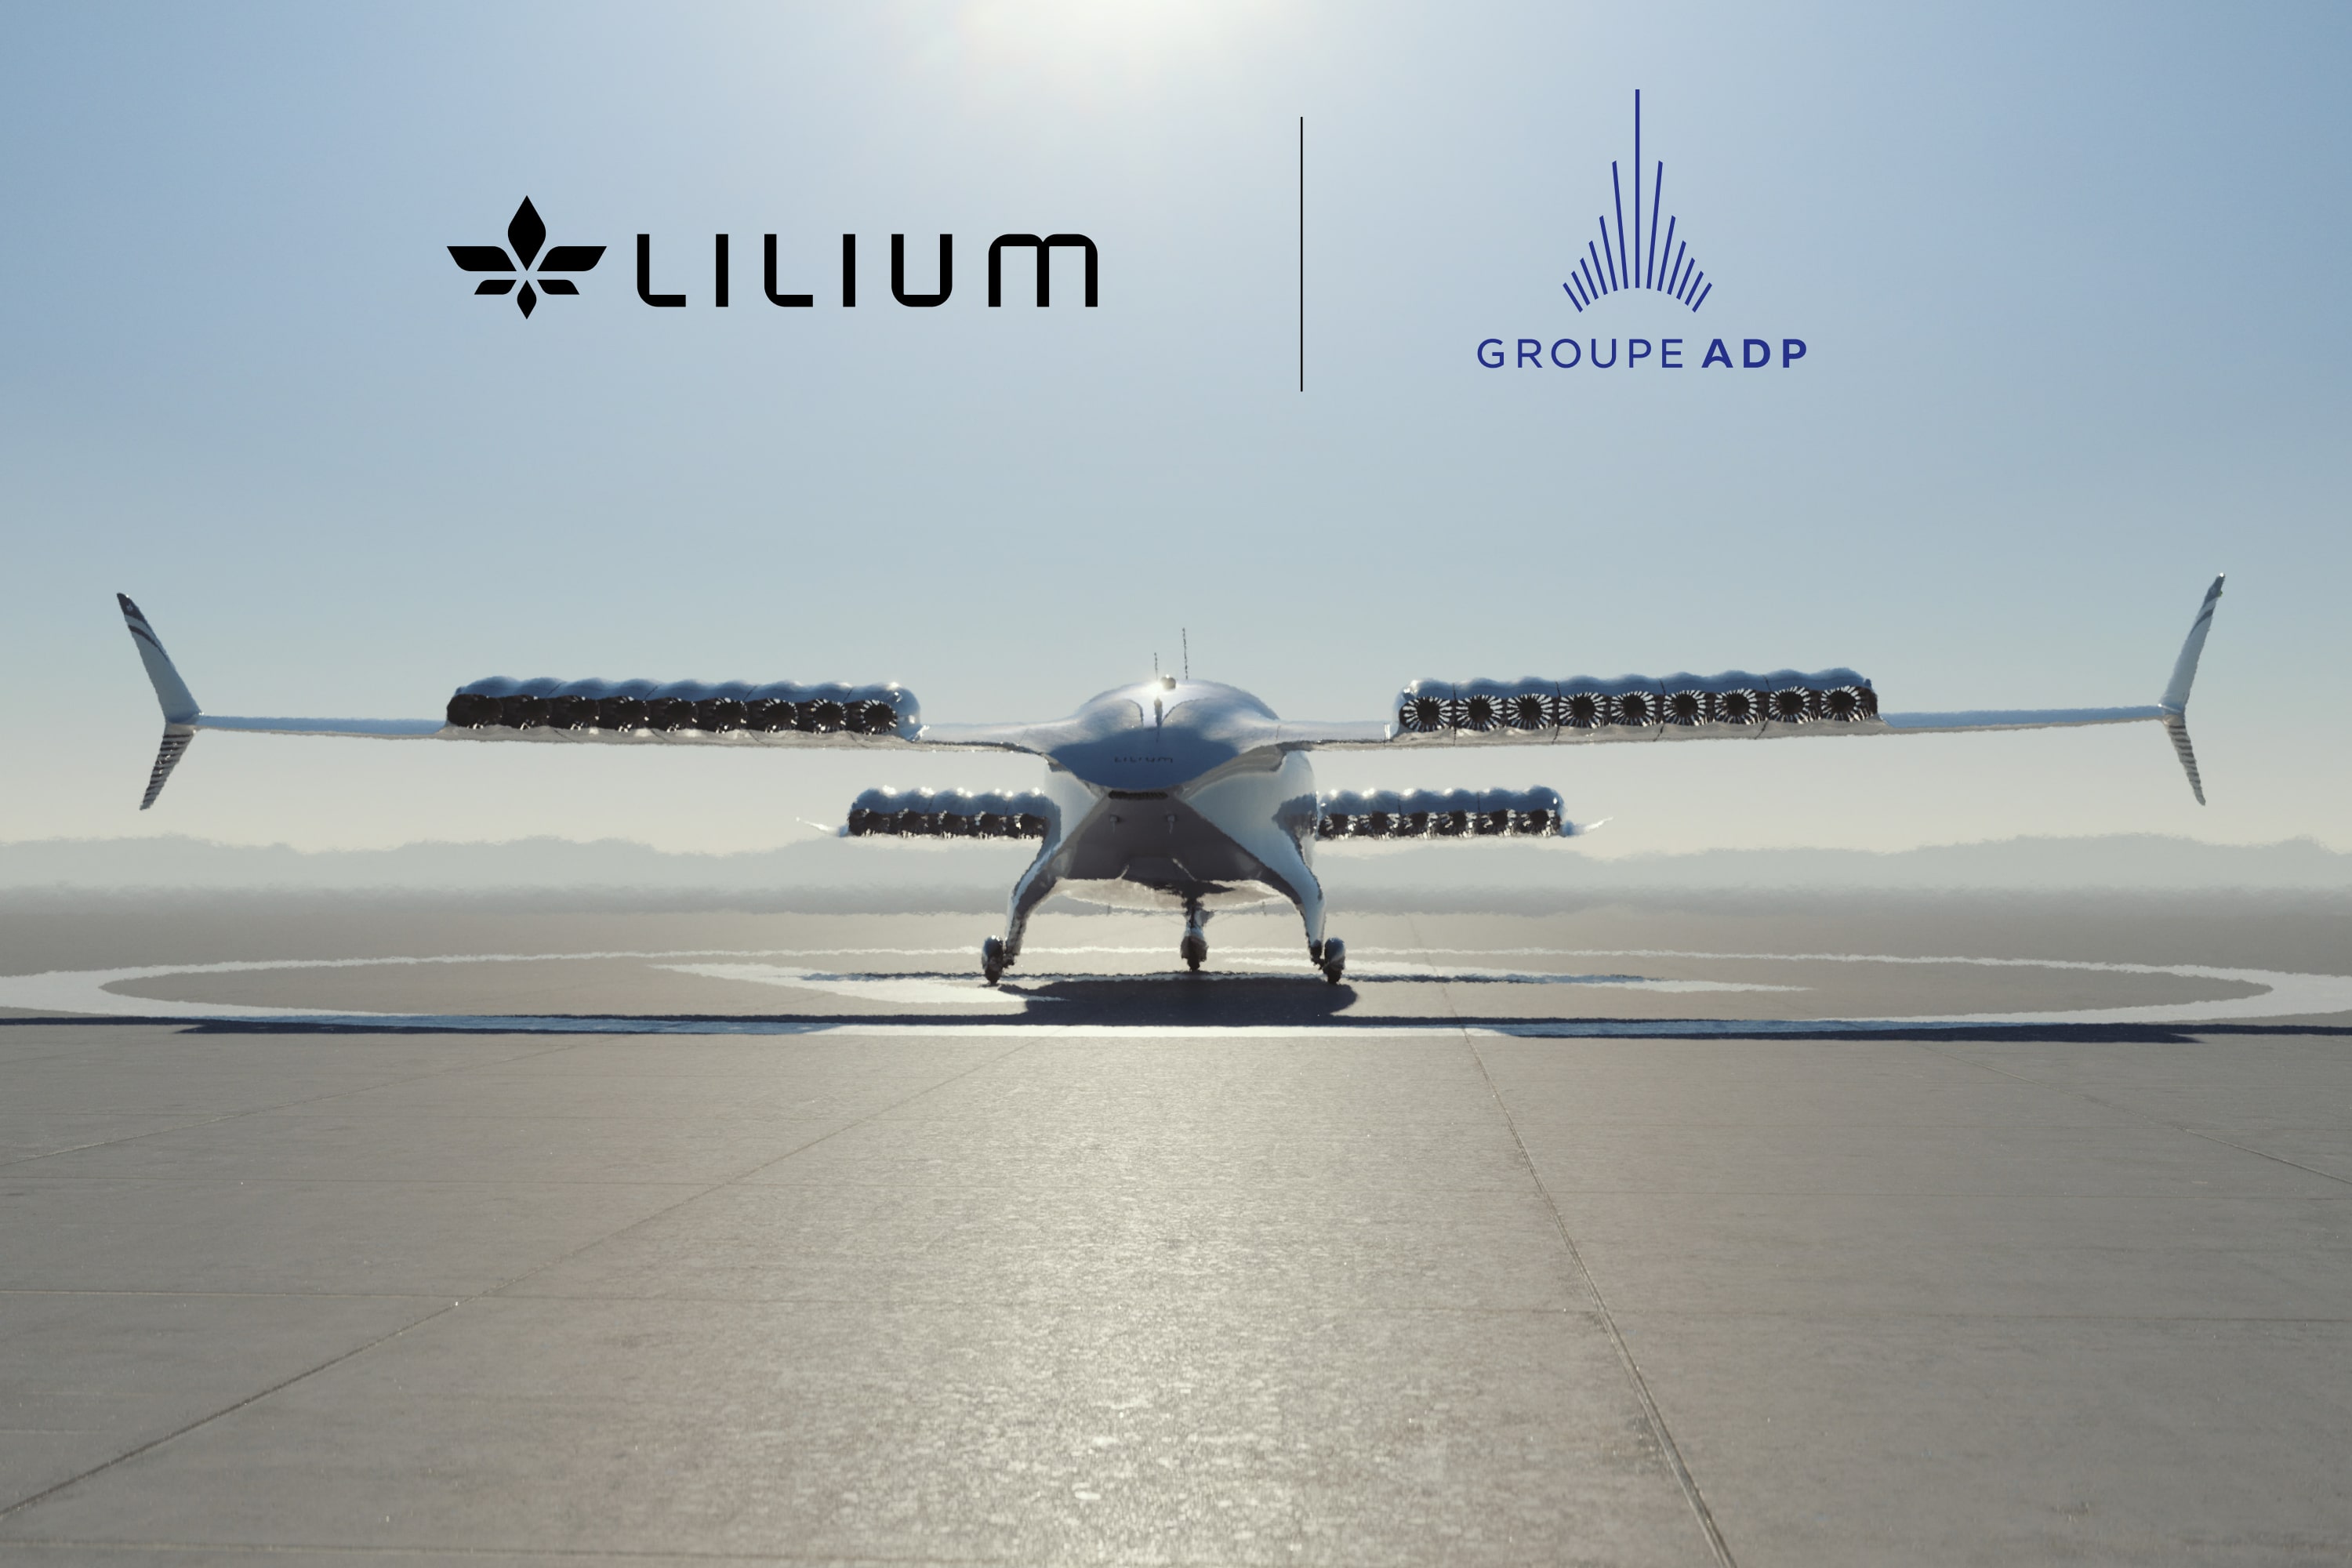 Lilium partners with leading global airport operator Groupe ADP to expand infrastructure network for the Lilium Jet